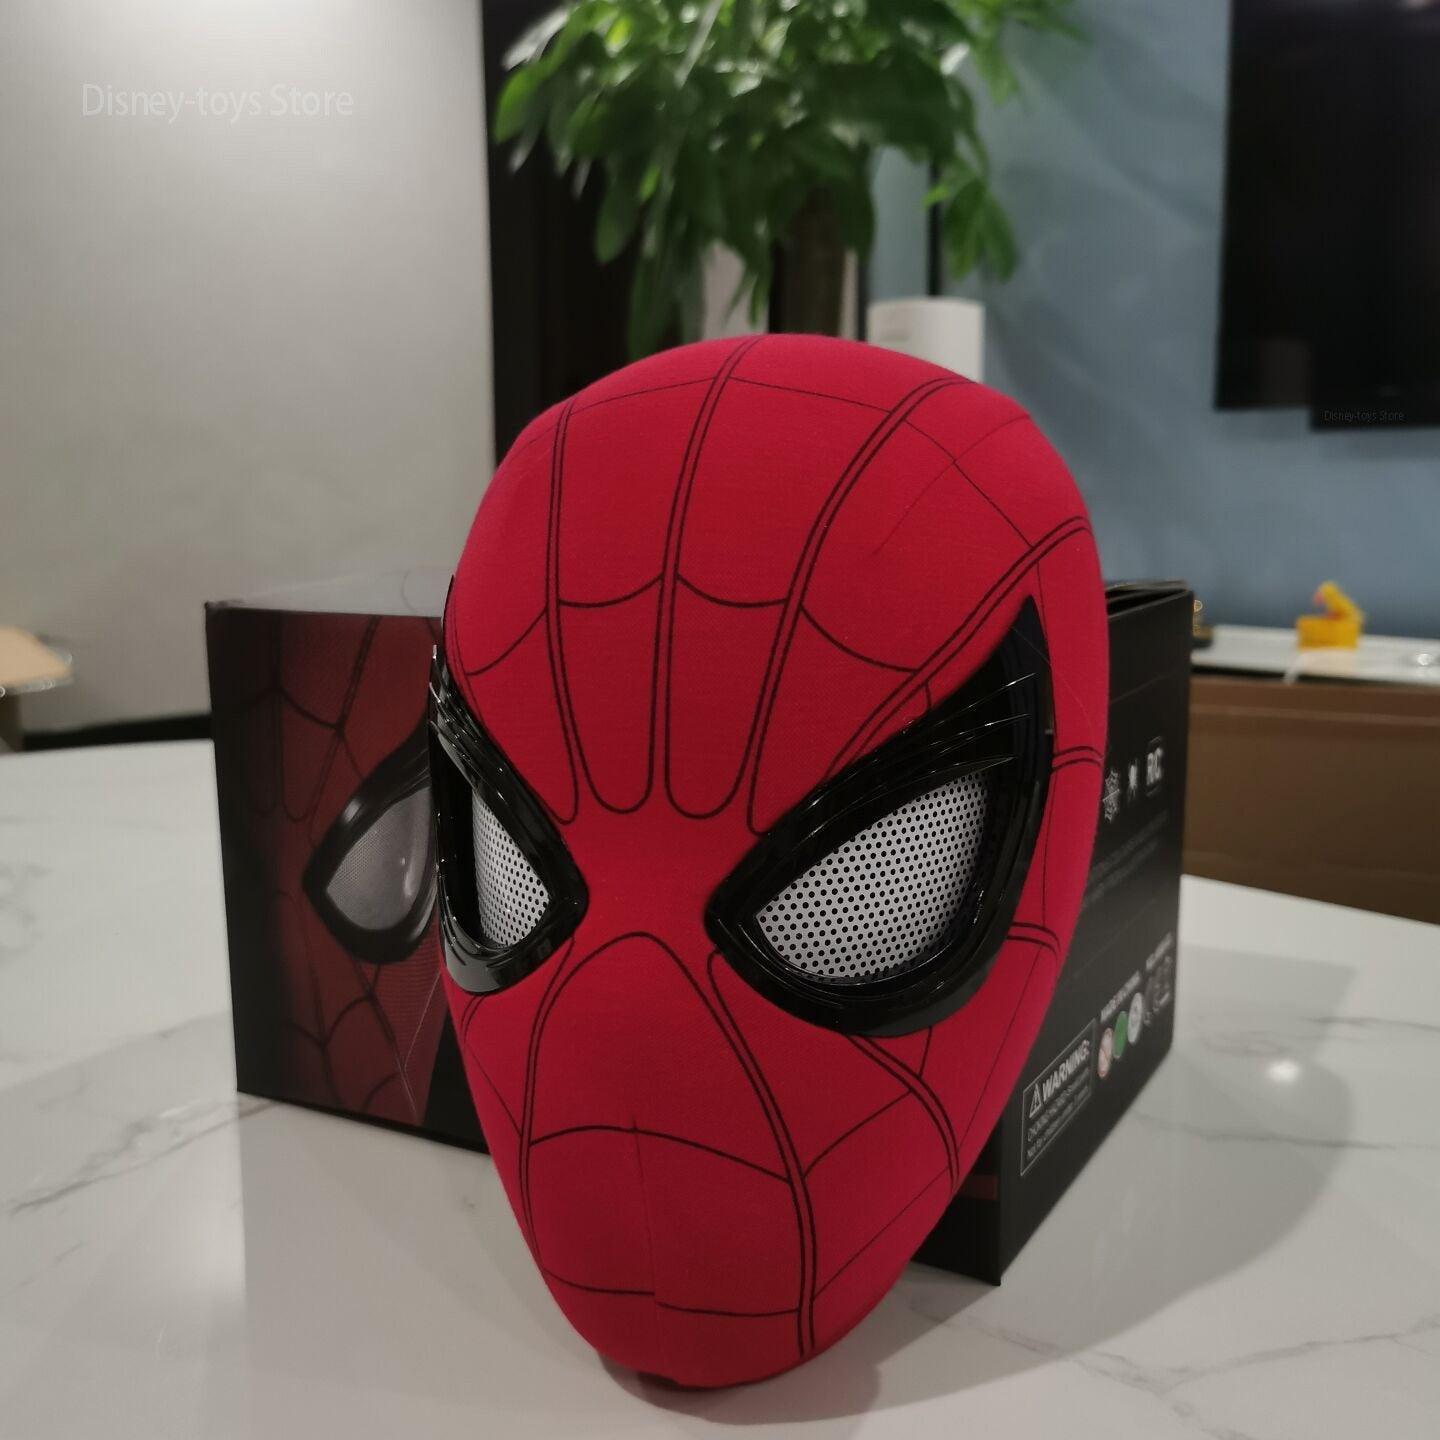 Spider-Man & Gwen Electric Luminous Mask - Spider-Man - Spiderman Mask With Movable Eyes - CozyBuys